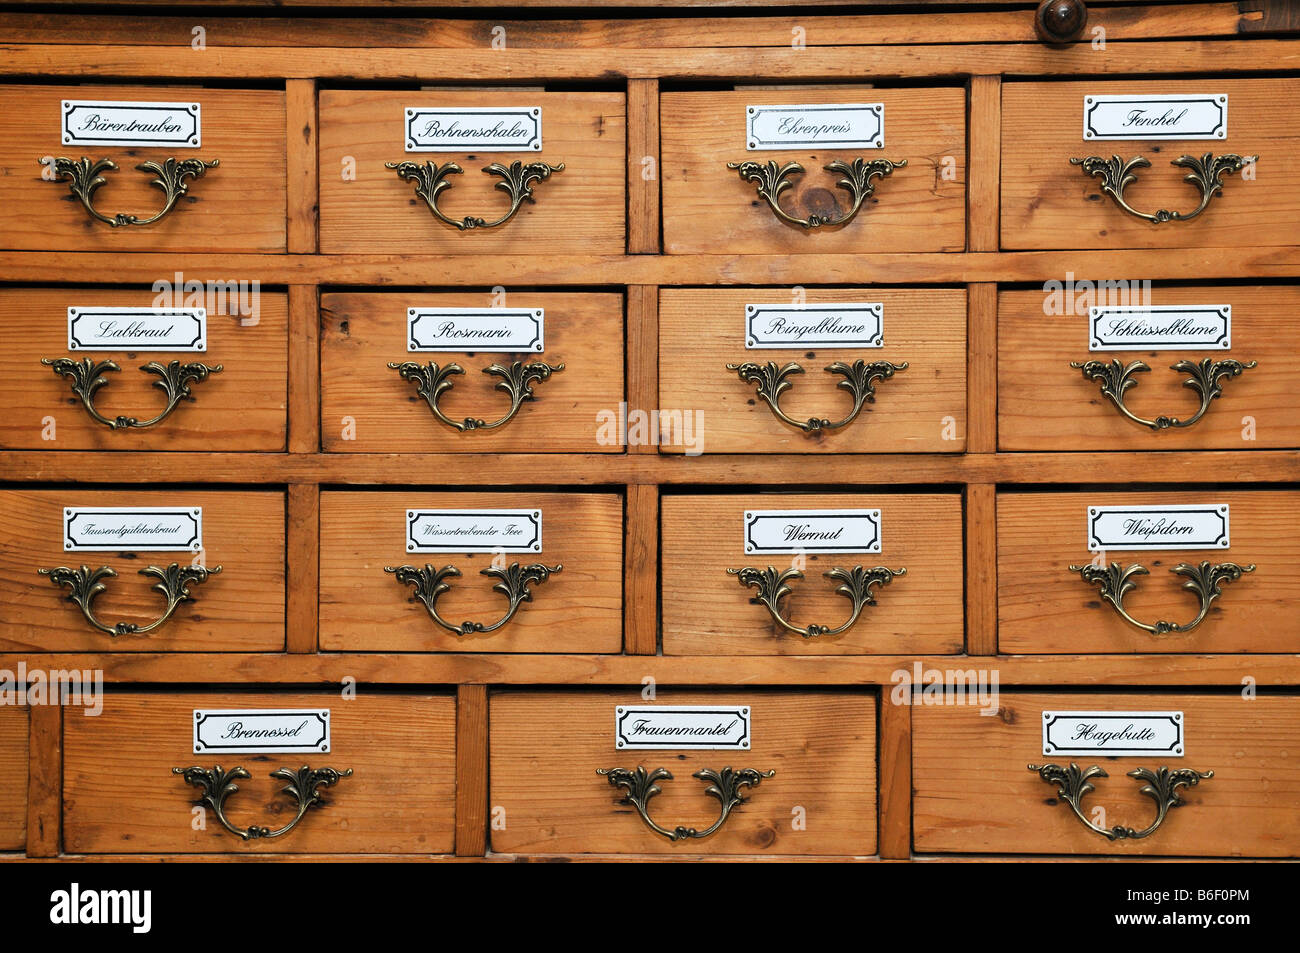 Historic pharmacist's cupboard for medicinal herbs, Germany Stock Photo